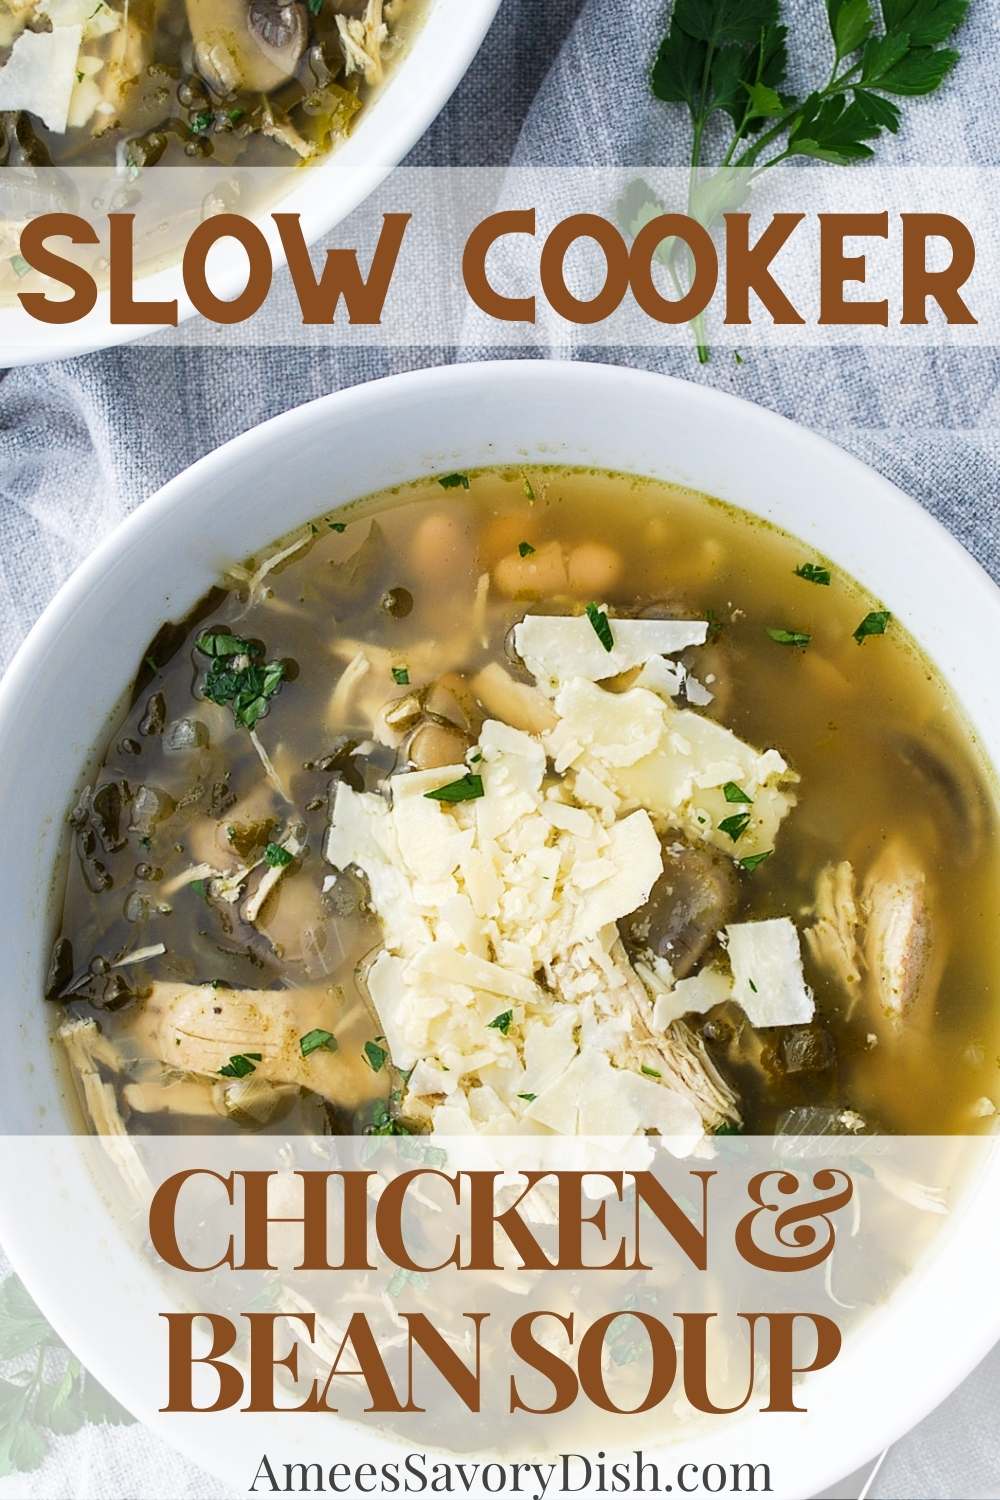 This slow cooker Chicken & Bean Soup is low-calorie and protein-packed made with chicken breasts, white beans, and fresh spinach. via @Ameessavorydish